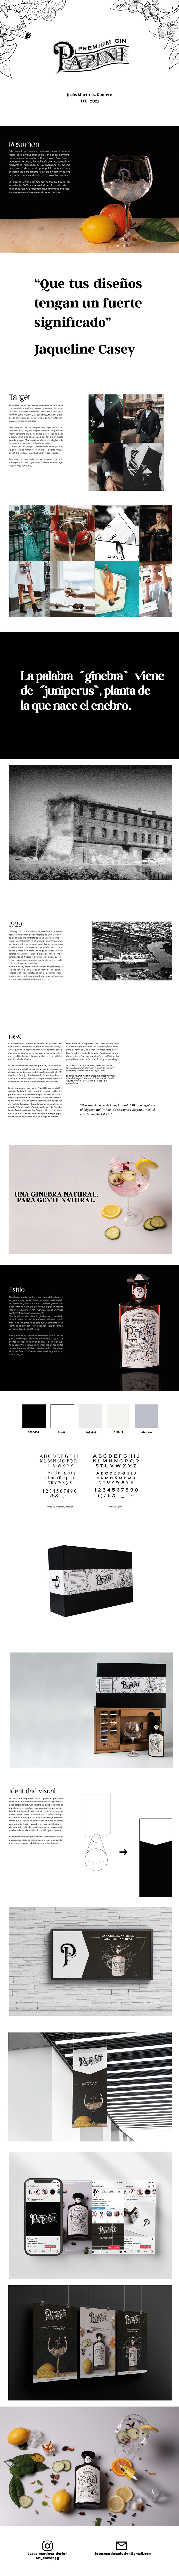 alcohol argentina design diseño gráfico gin jerez Packaging papini proyecto TFE